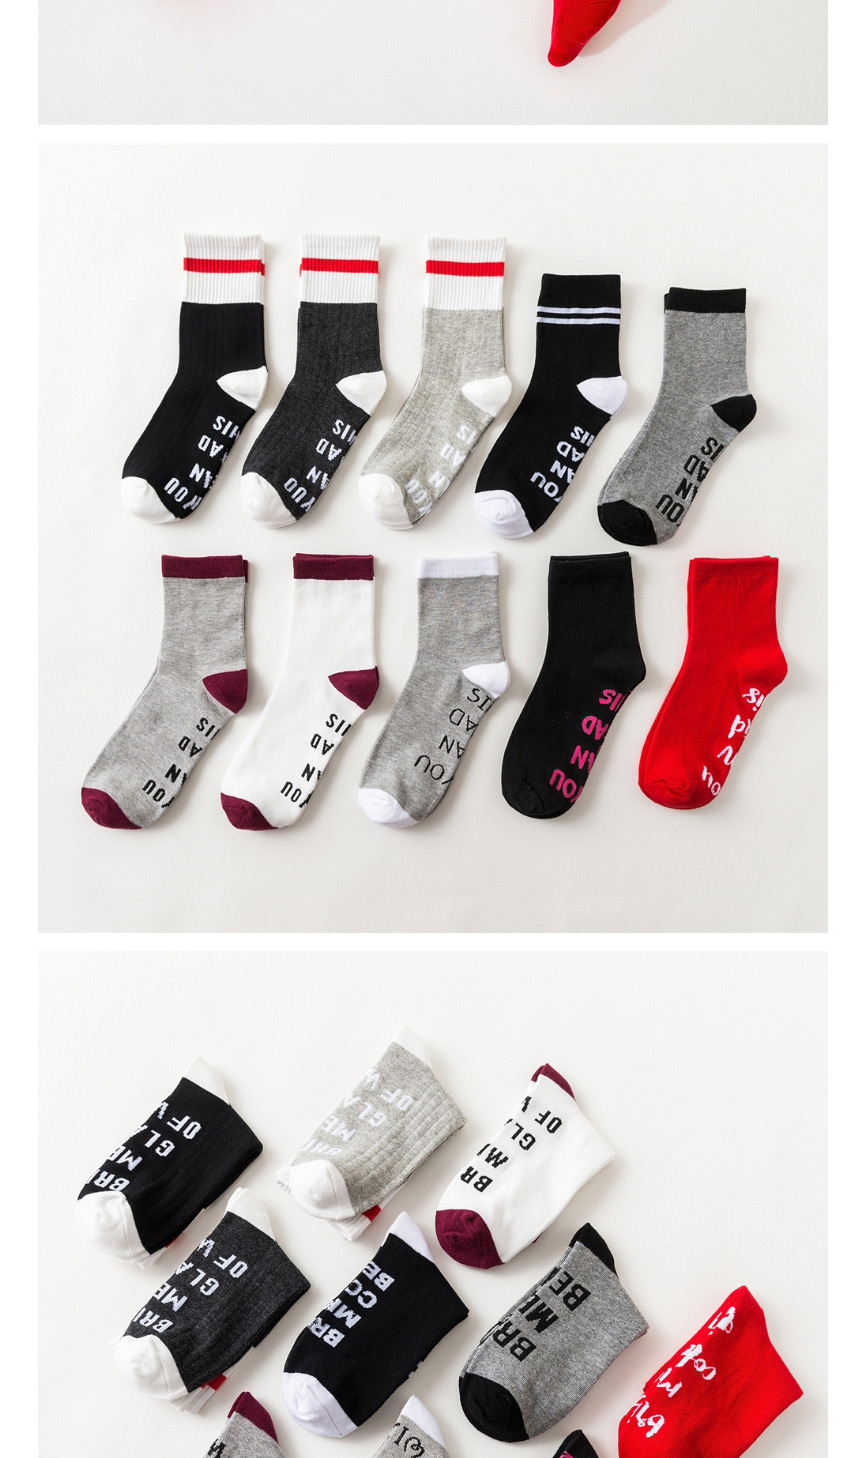 Fashion Black On Gray Plantar Letters Hit The Color In The Tube Pile Pile Socks,Fashion Socks